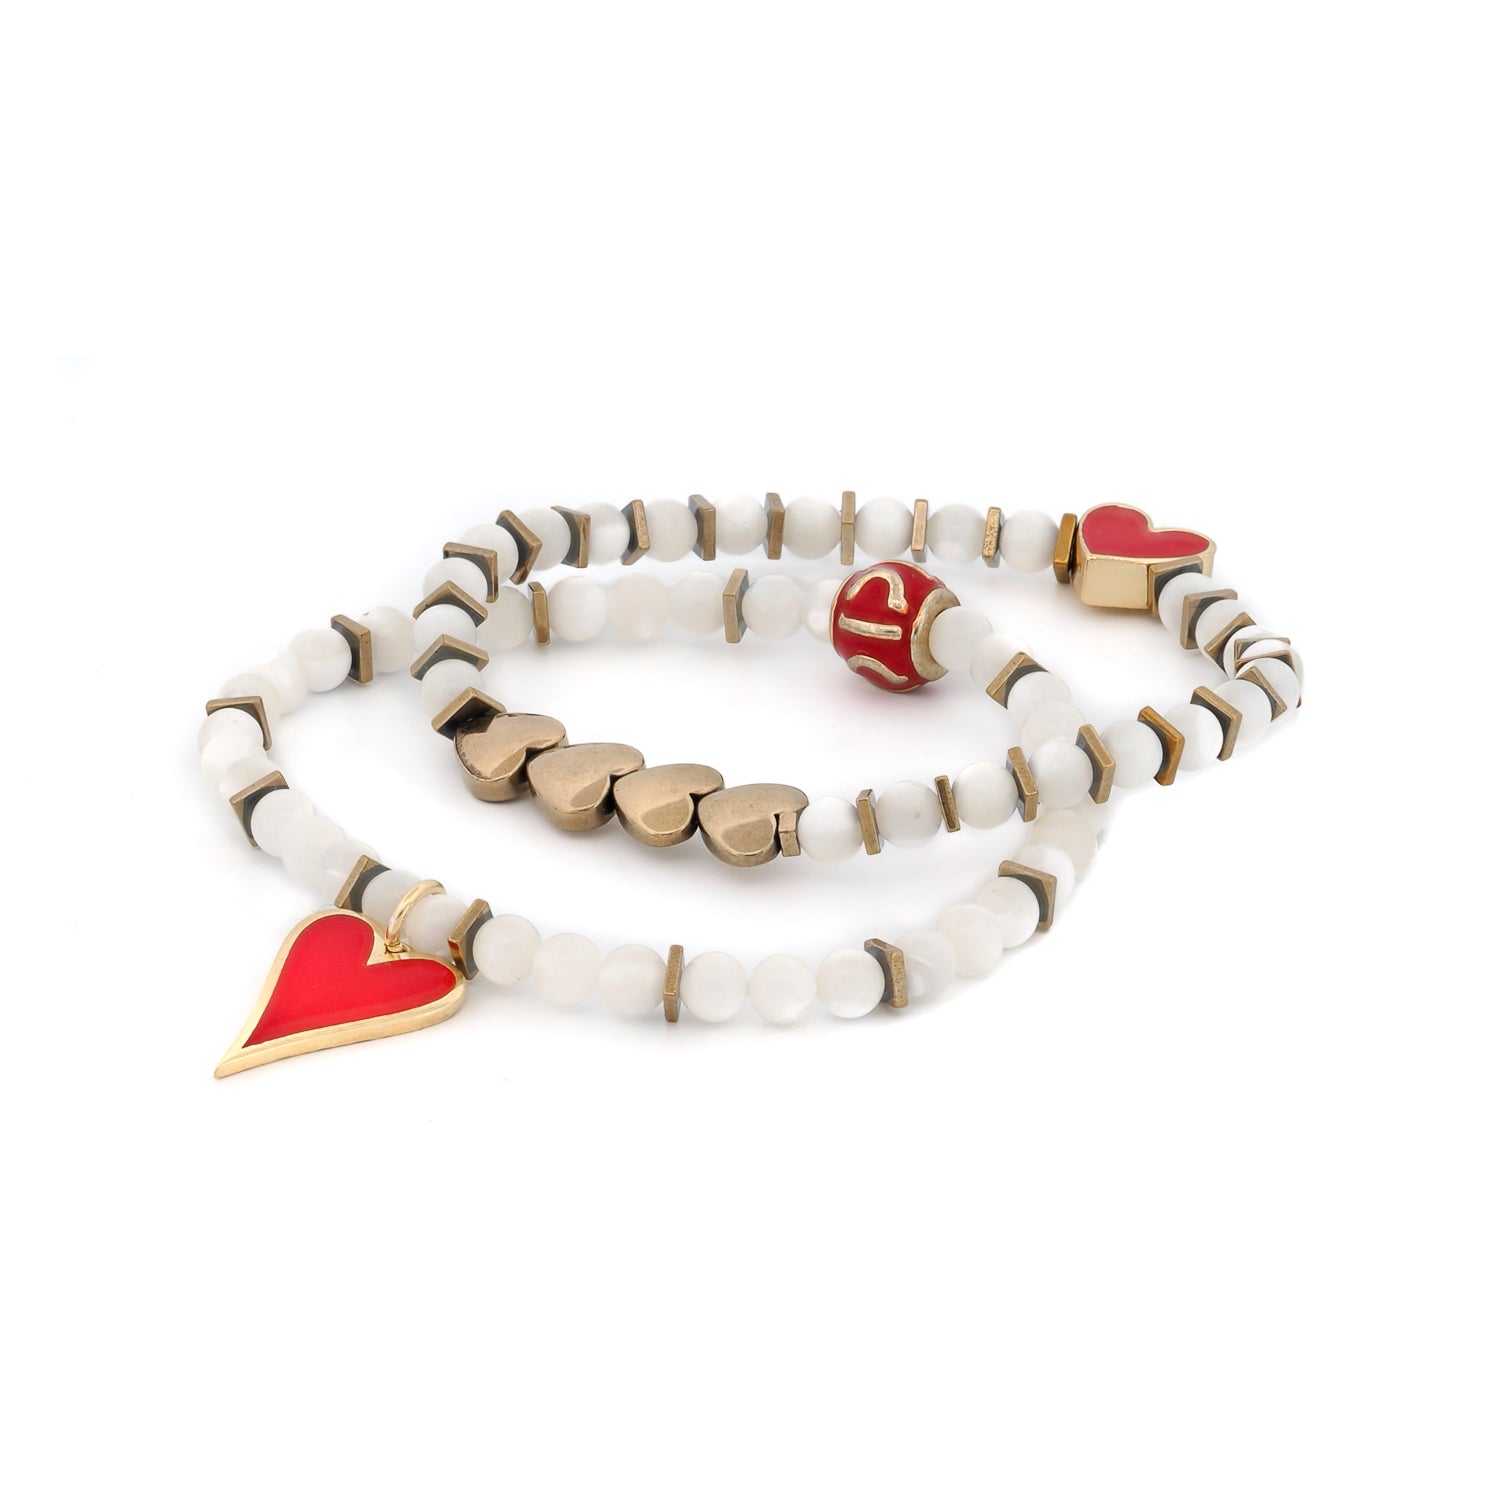 White Beads with Red Heart Charms Bracelet Set